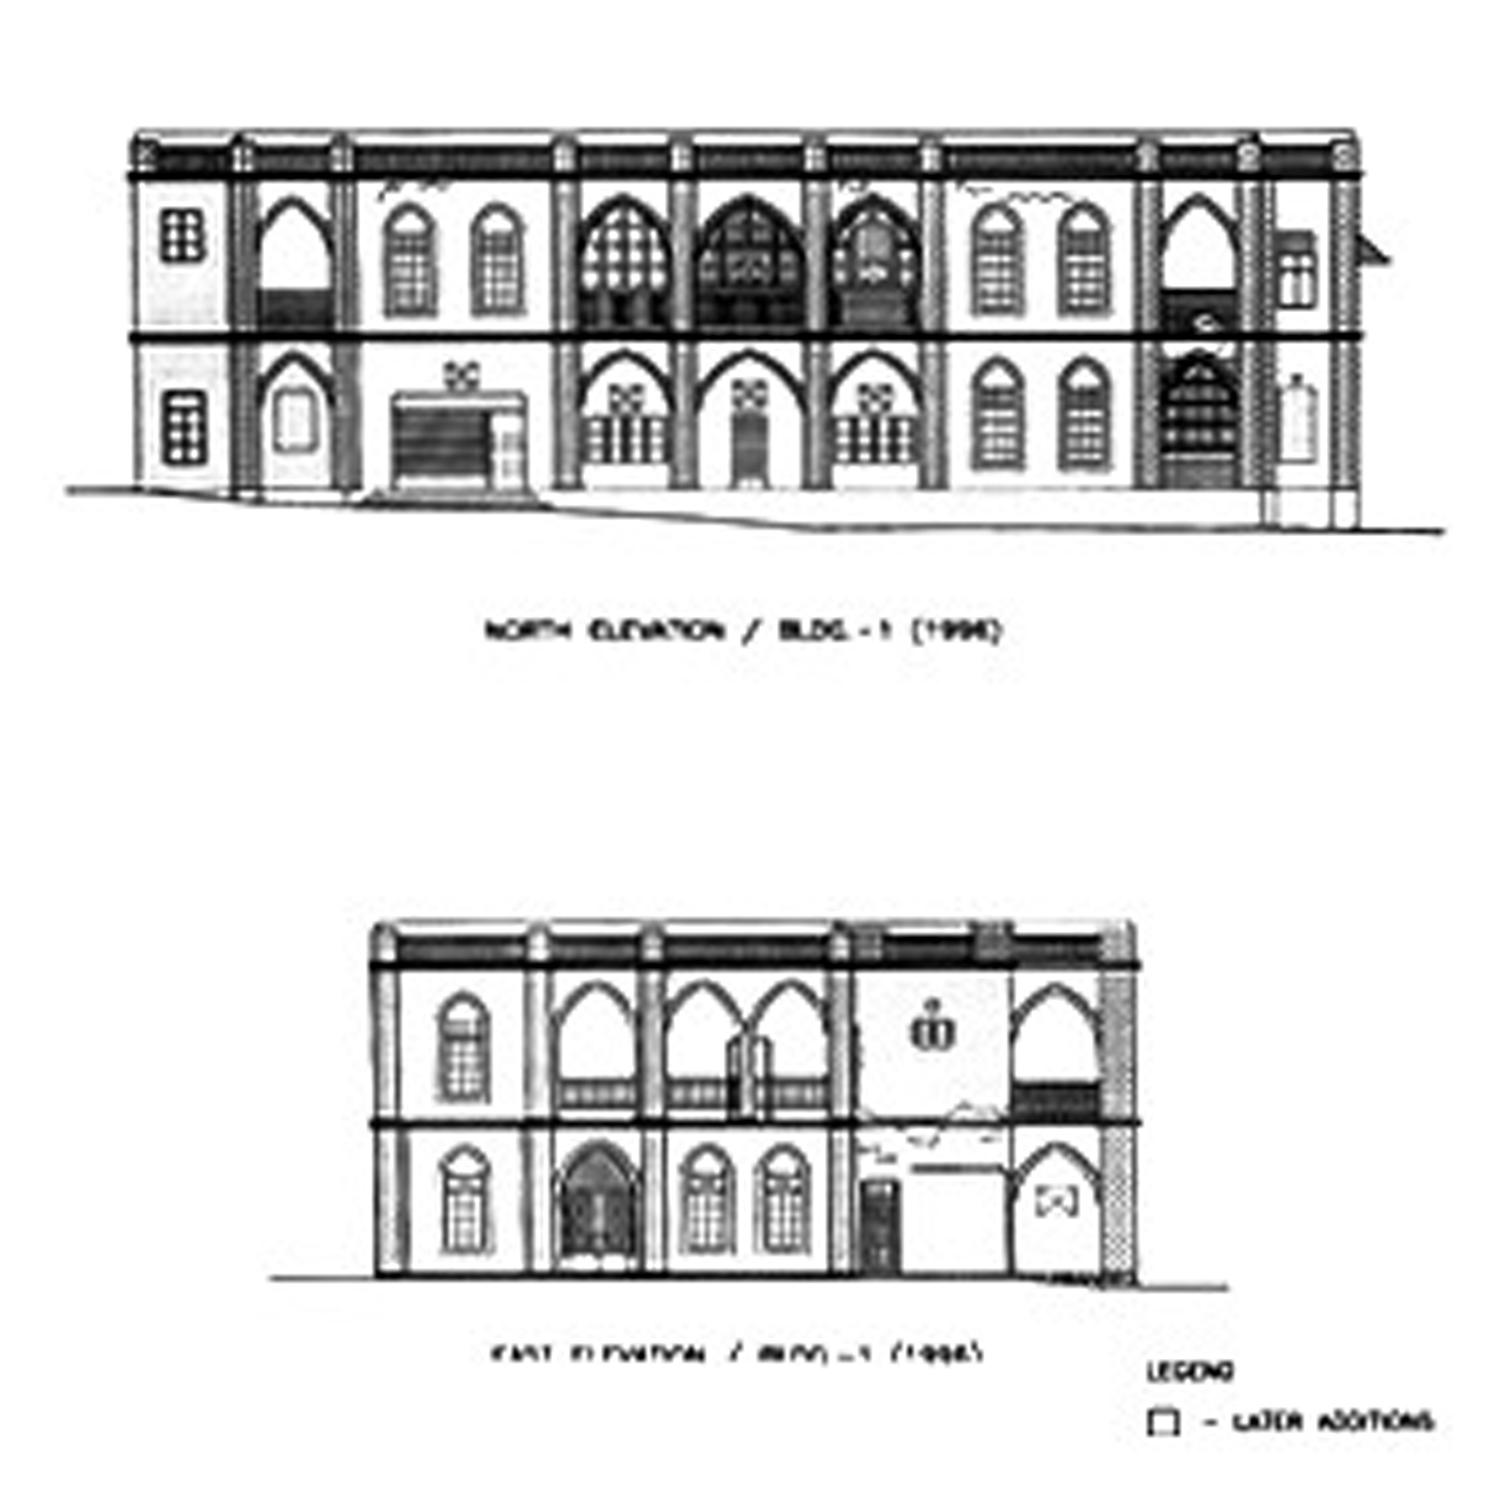 Elevations of the survey done by UNESCO/UNDP in 1995